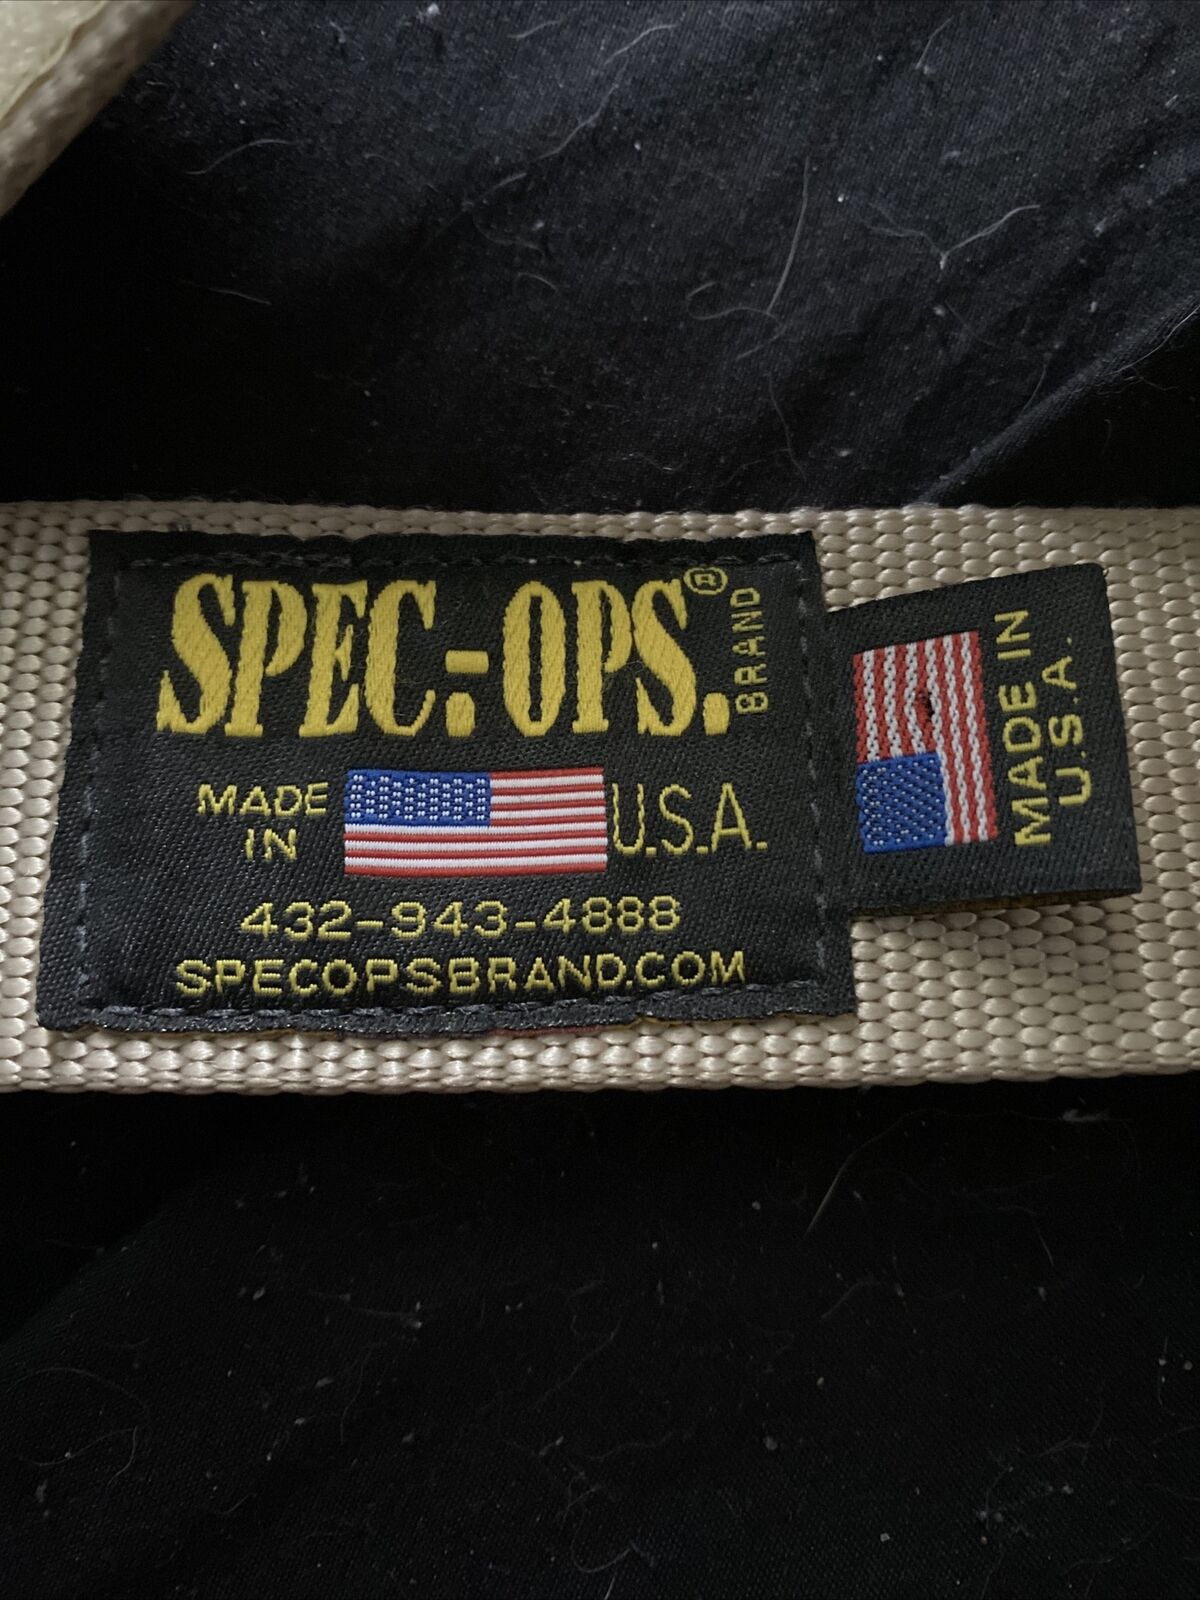 SPEC-OPS BRAND 432-943-4888 MADE IN THE USA REGULAL